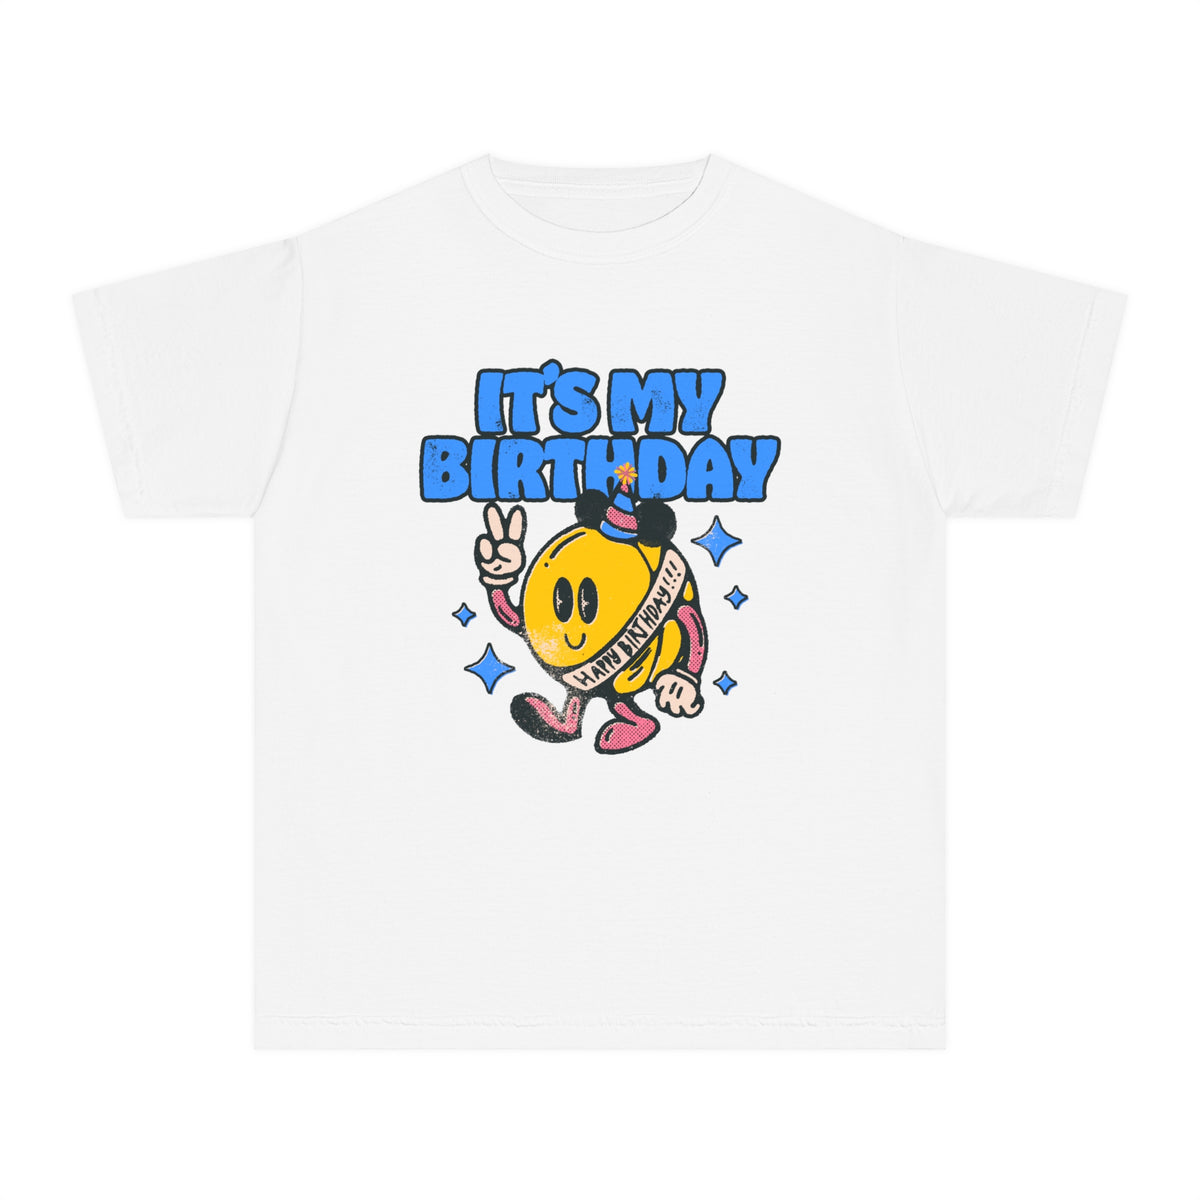 It's My Birthday Comfort Colors Youth Midweight Tee